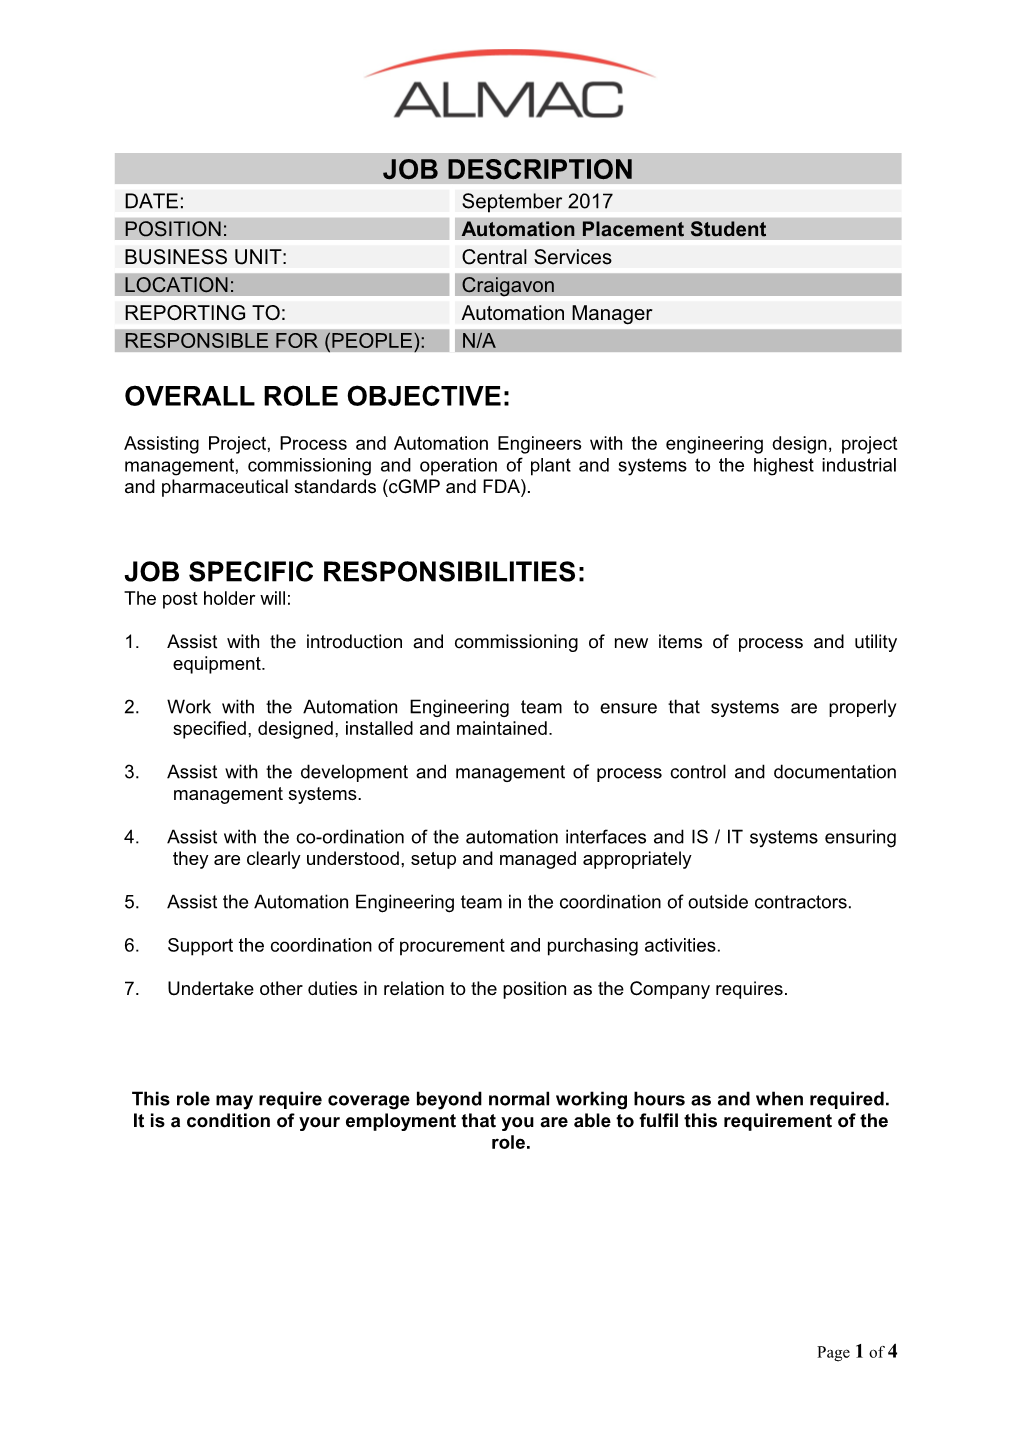 Overall Role Objective